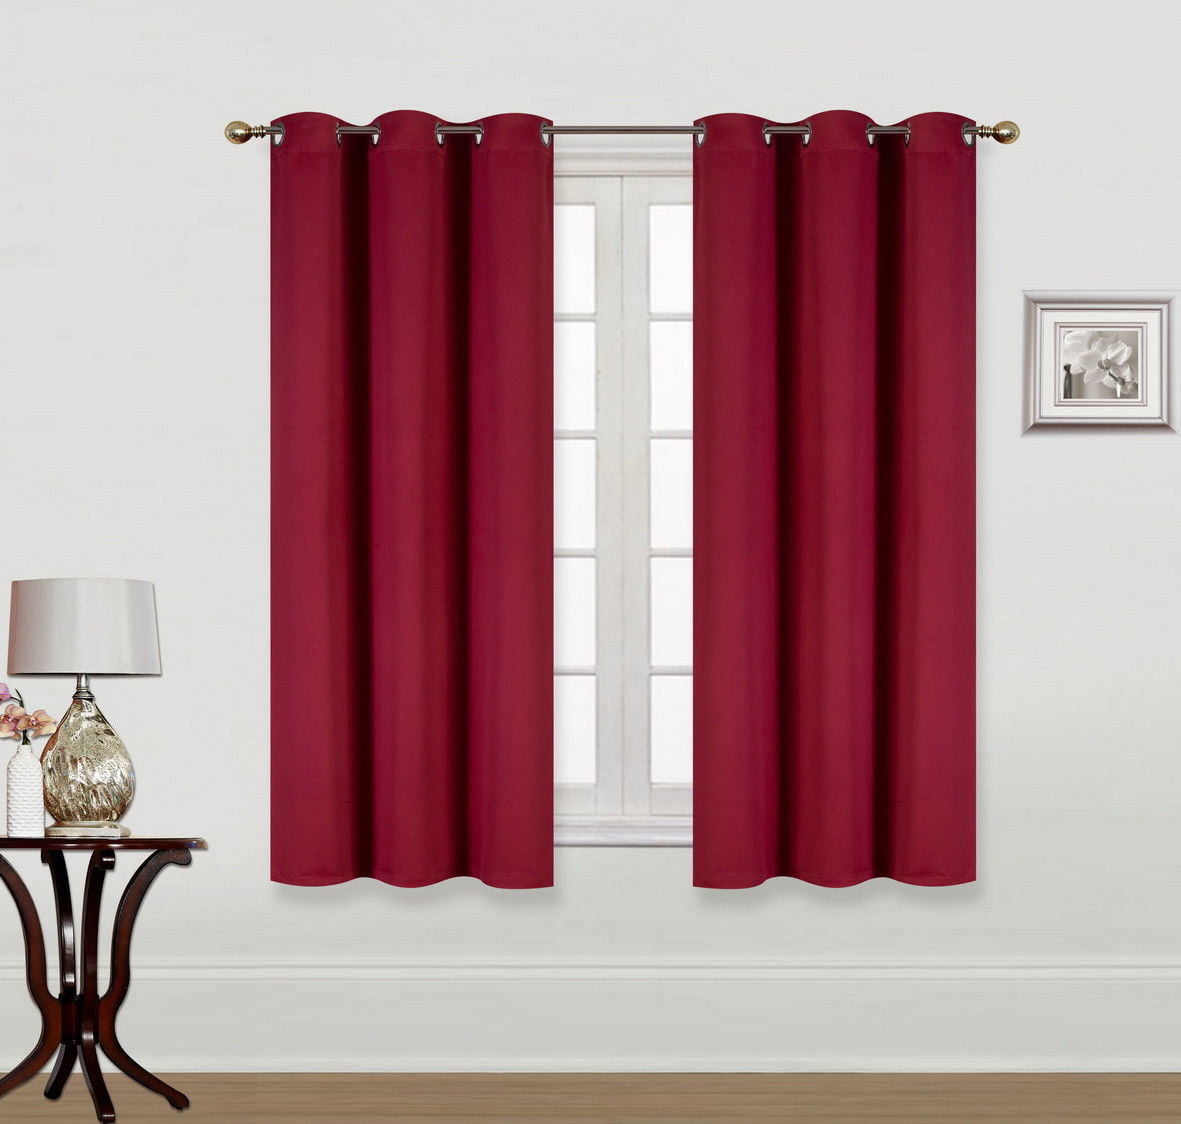 52x63-2panels, Burgundy DREAM ART Anti-Microbial Super Soft Thermal Insulated Curtain/Drape for Nursery,Children Kids Bedroom Eyelet Blackout Curtains for Livingroom Energy Saving Noise Reducting